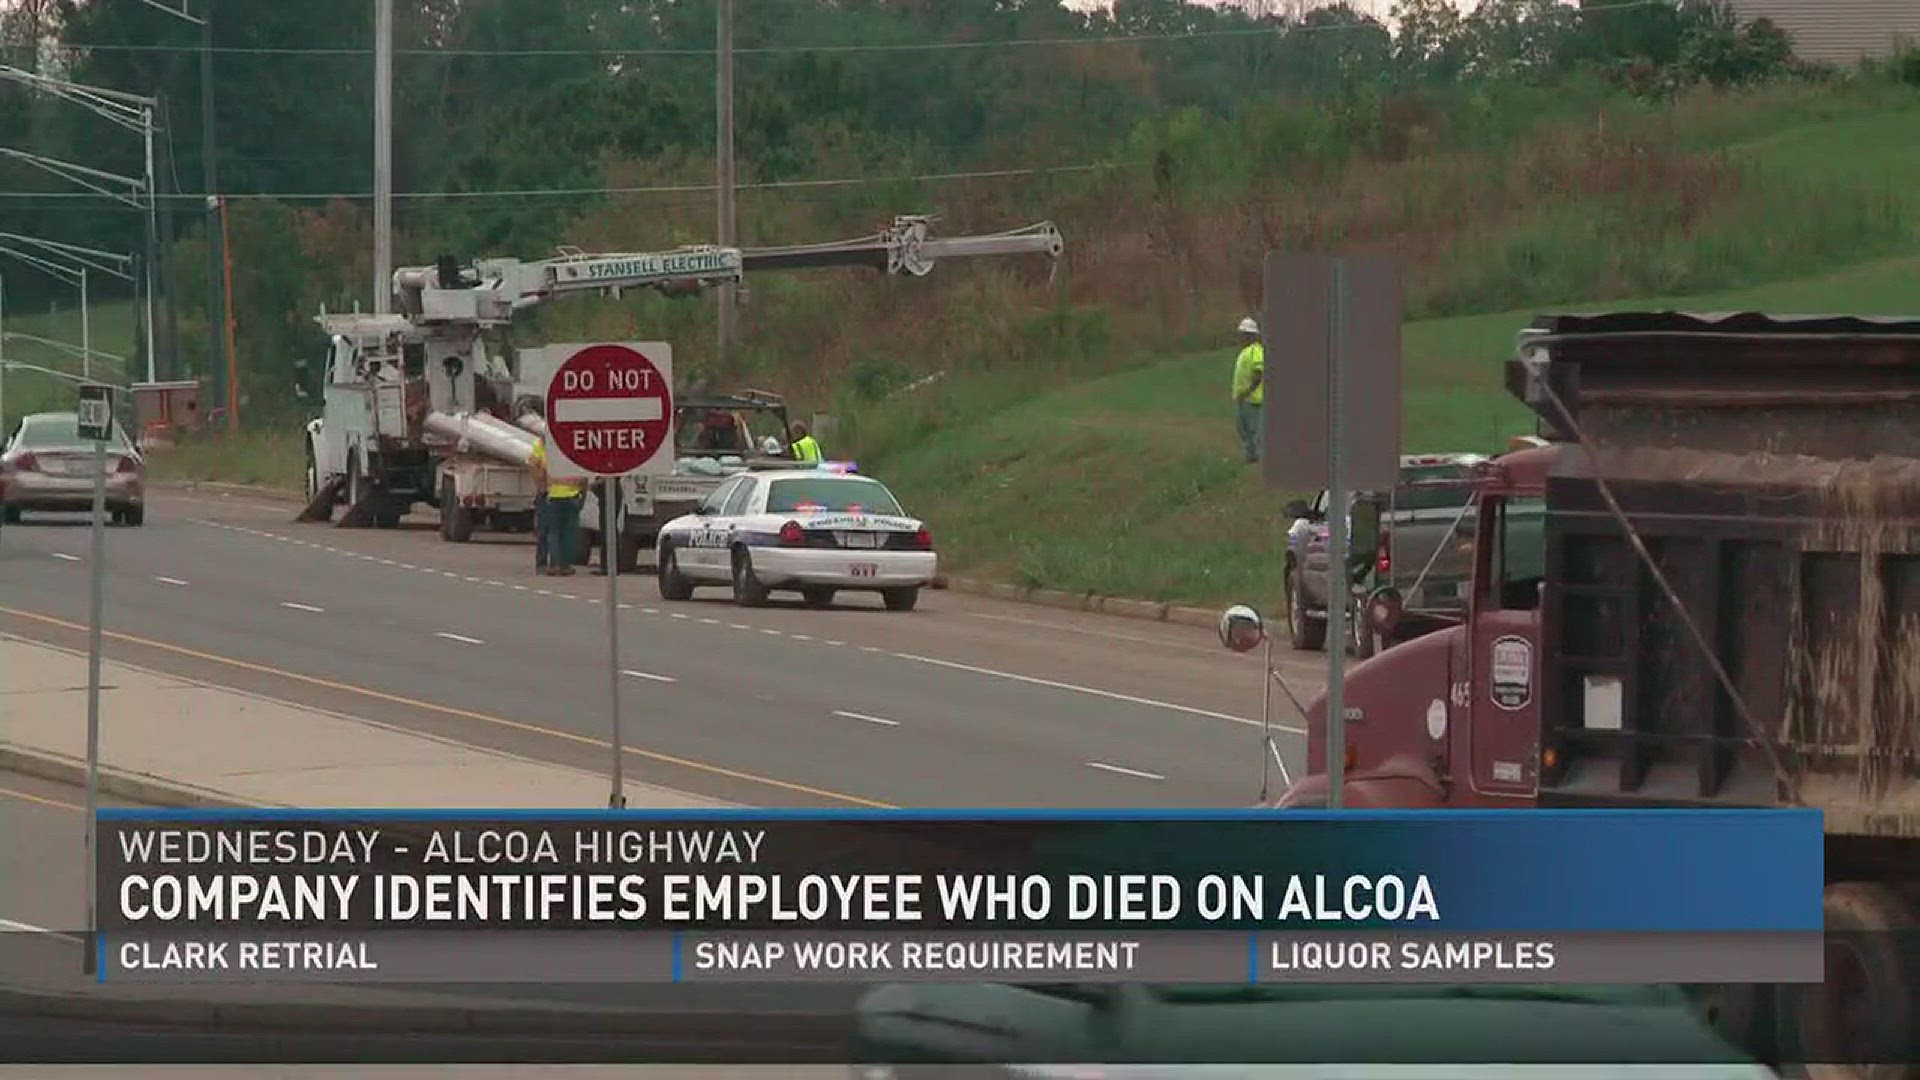 Sept. 18, 2017: Stansell Electric has identified the worker who died along Alcoa Highway.